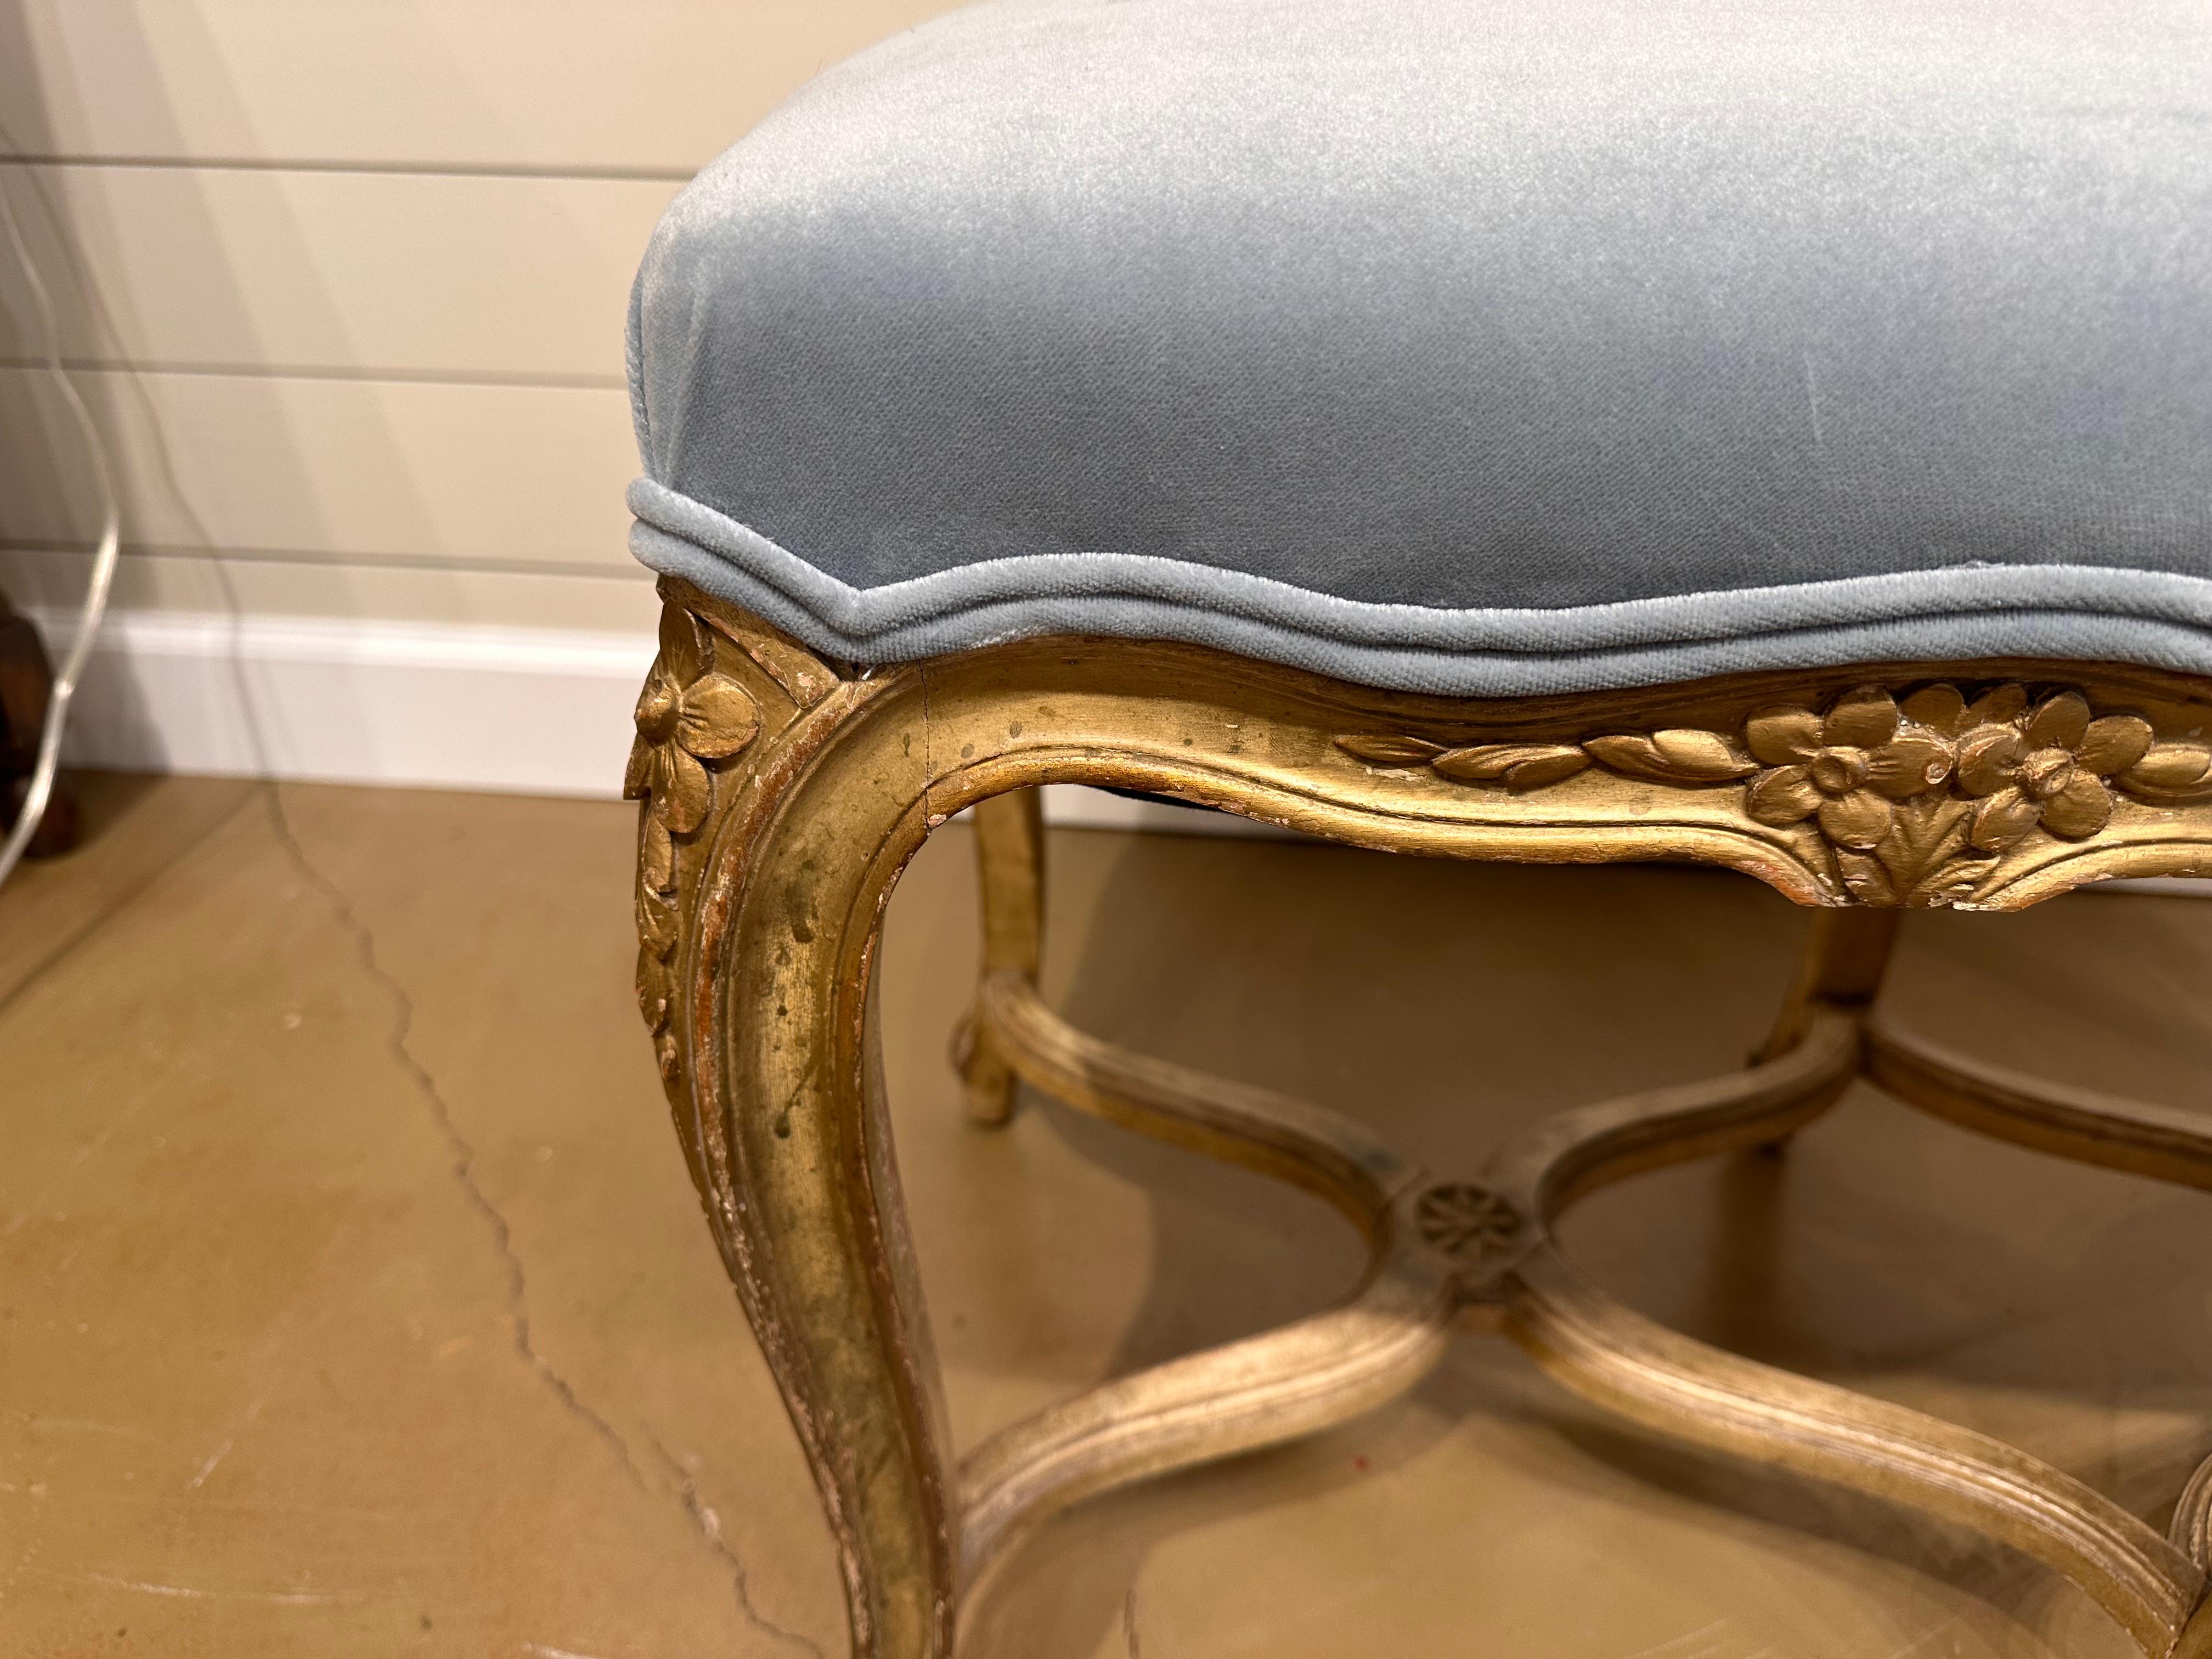 This is an early 19th century French bench we just had recovered in a beautiful sky blue, crushed velvet fabric. Notice the double cording around the edges, fitting to all the contours of the bench making for great detail. The  frame show perfect